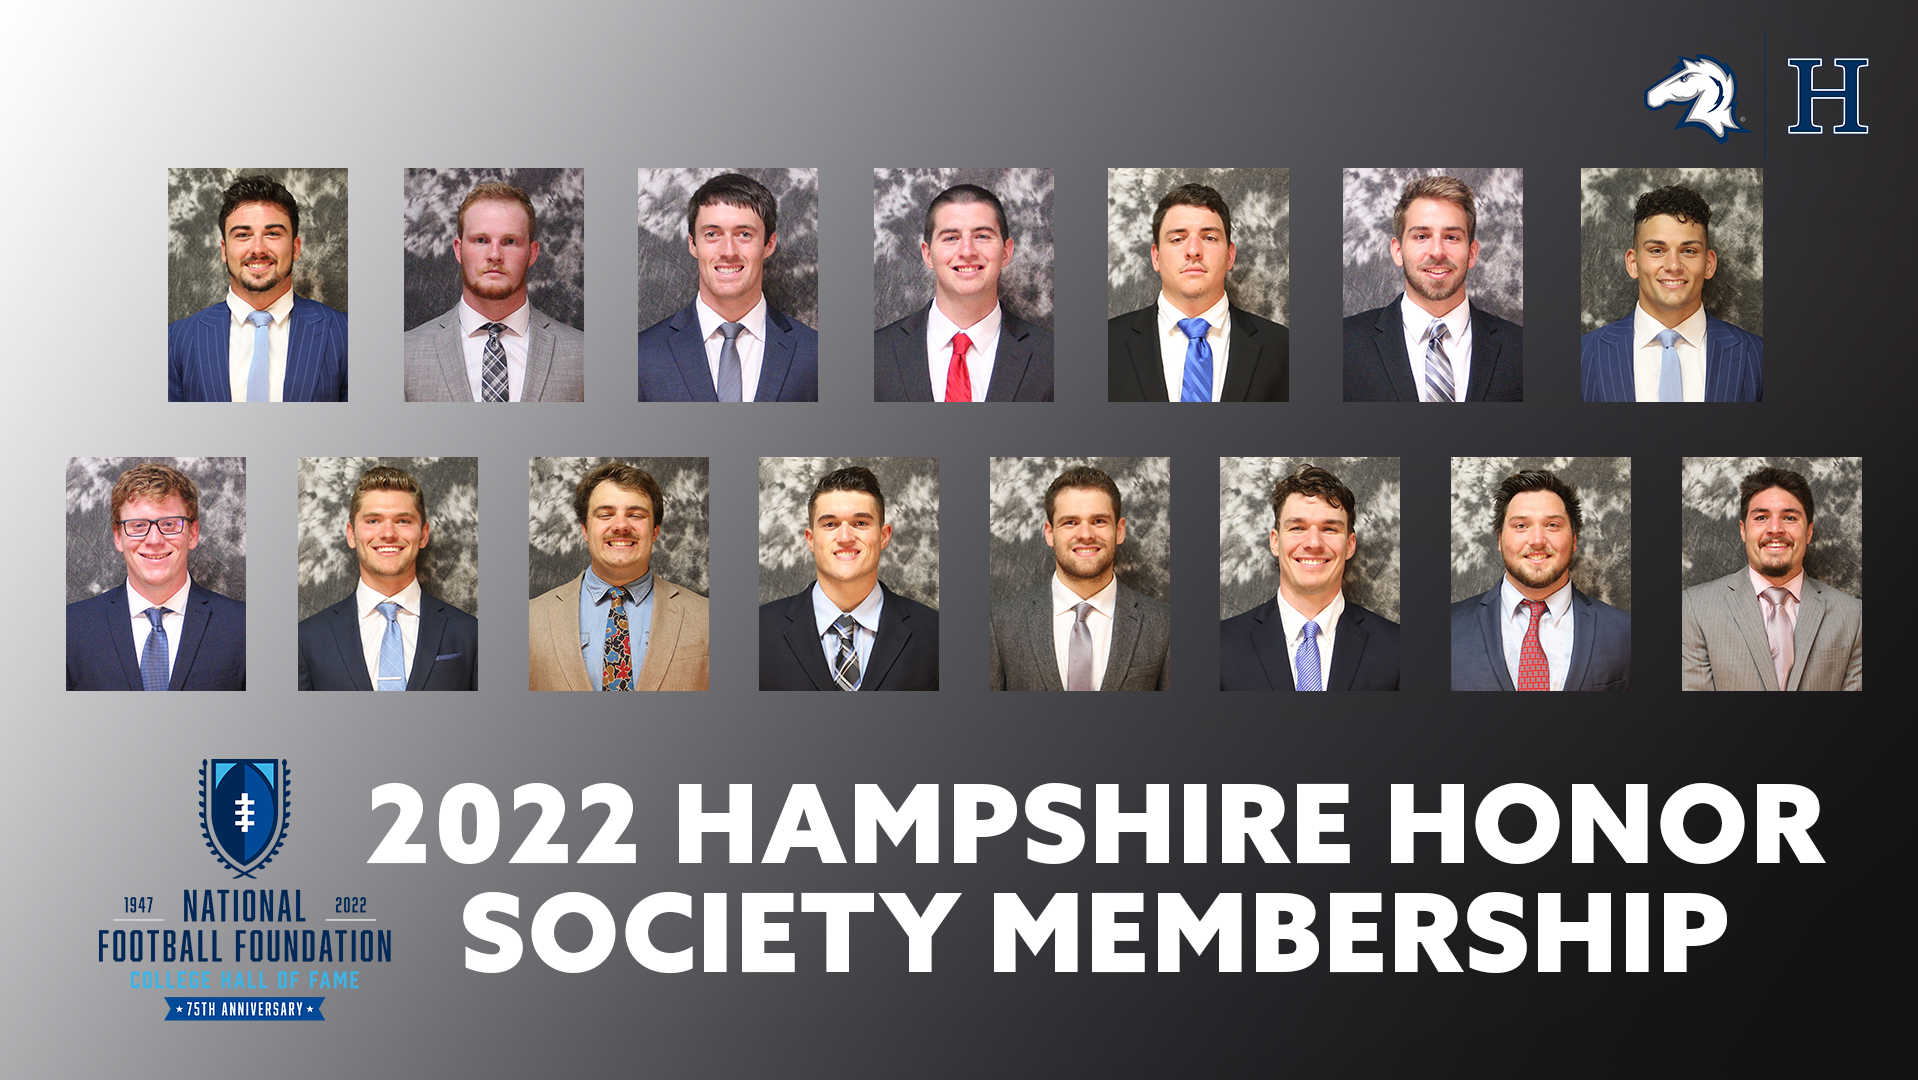 NCAA DII-best 15 Chargers inducted into NFF Hampshire Honor Society